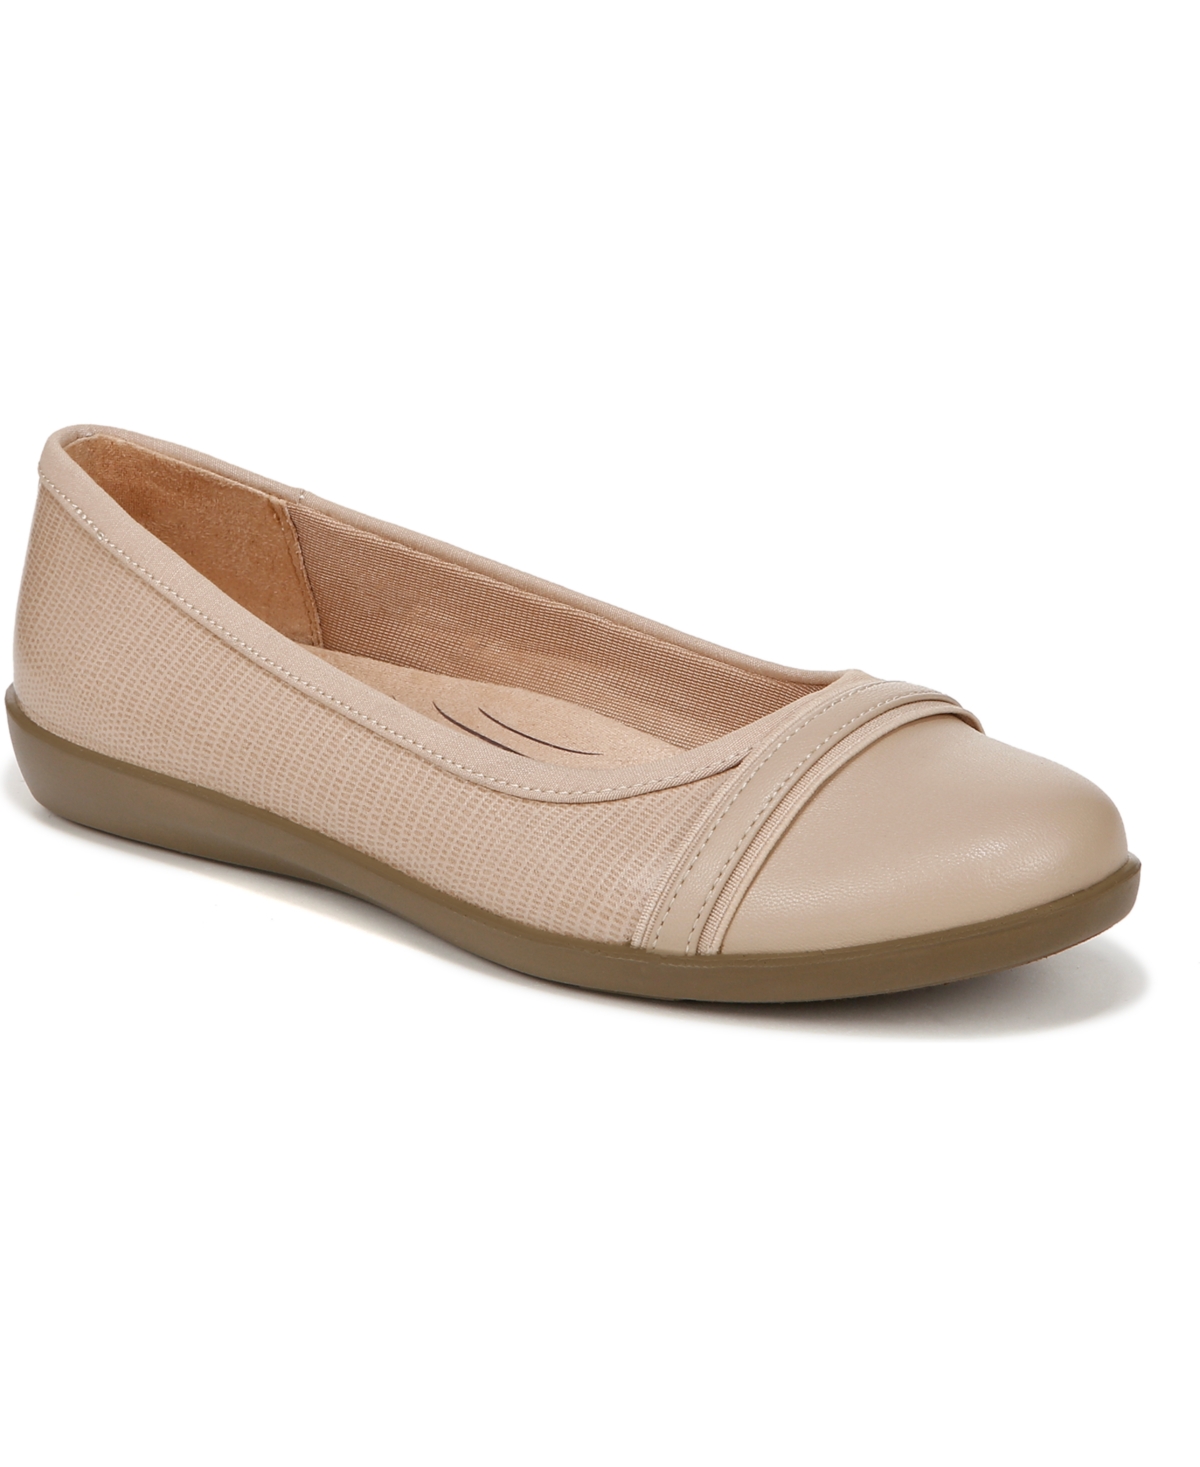 Nile Ballet Flats - Tender Taupe Faux Leather